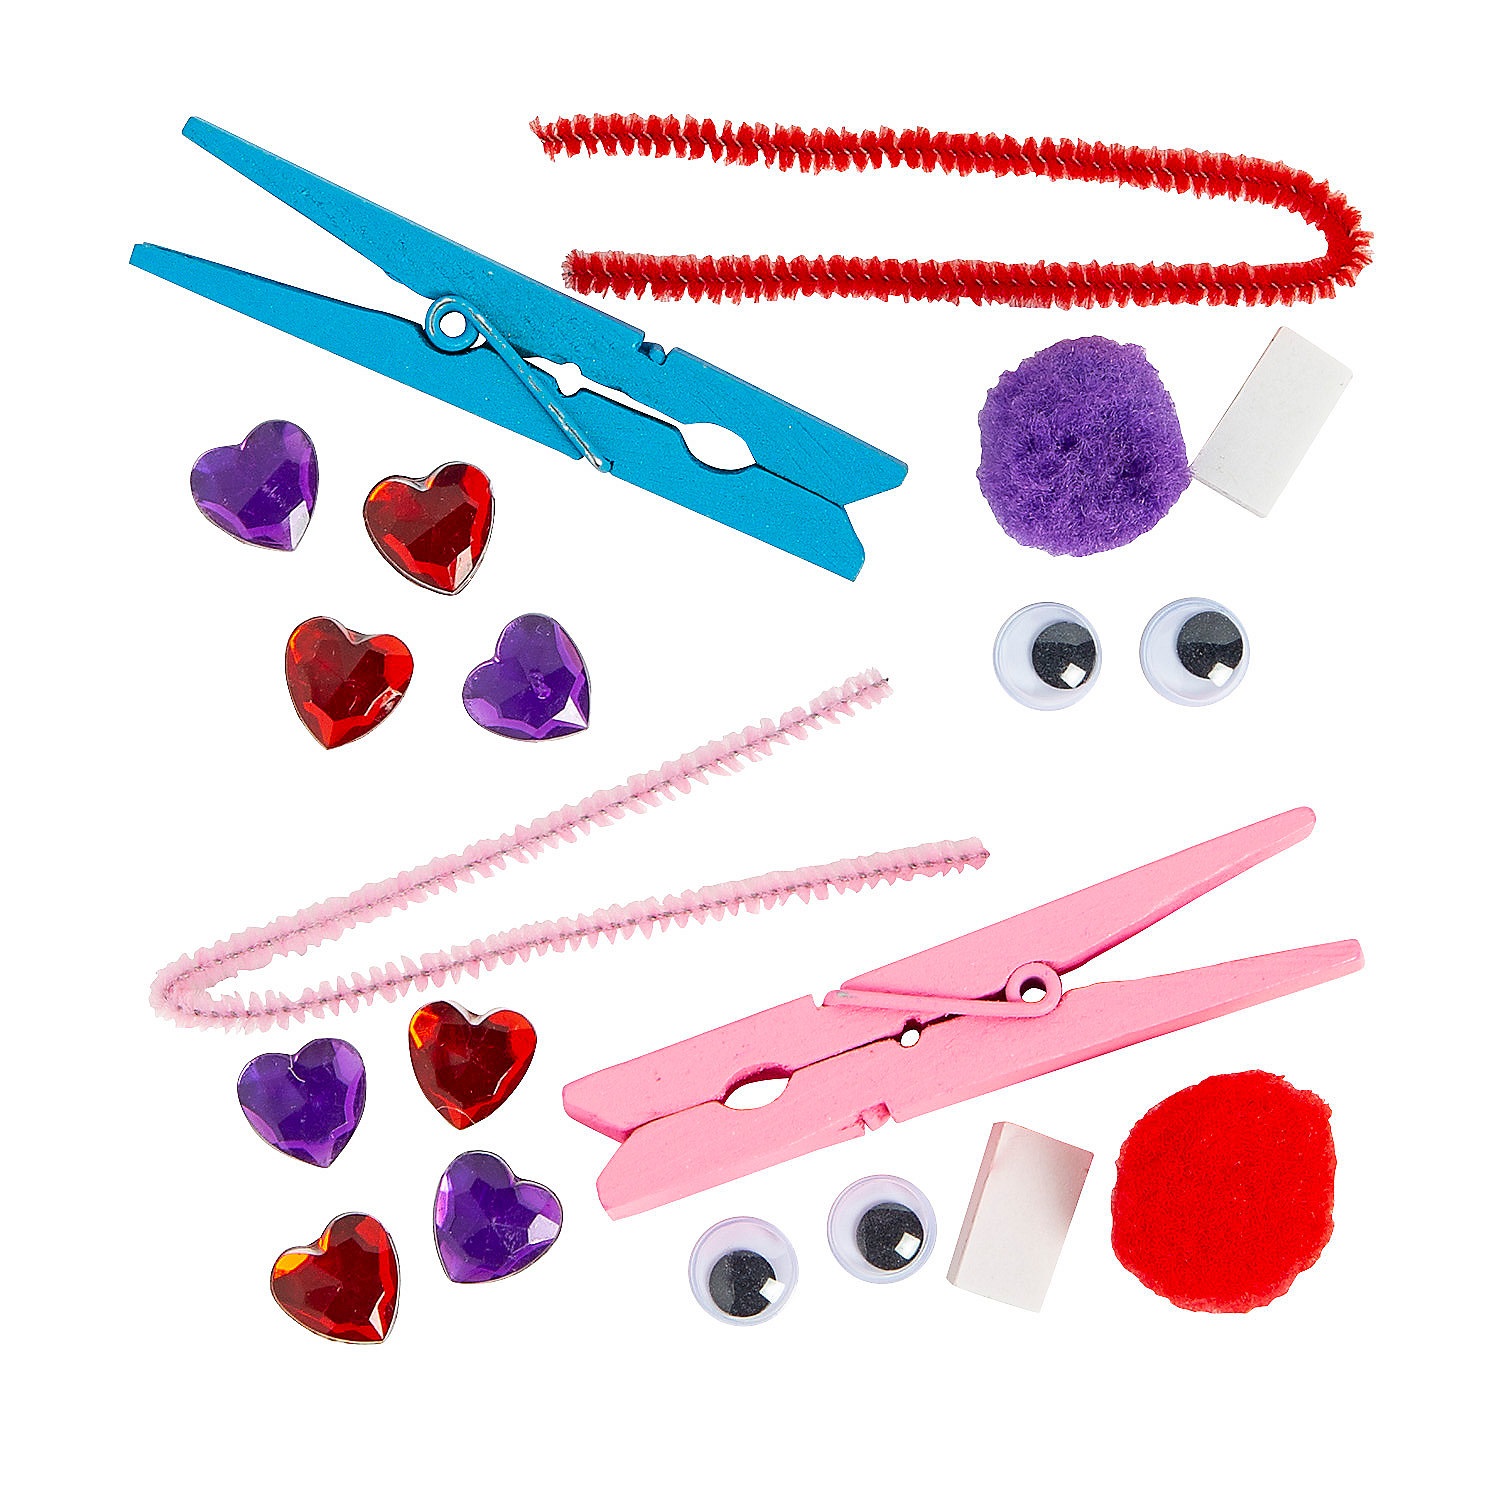 valentine-dragonfly-clothespin-craft-kit-makes-12_13962617-a01